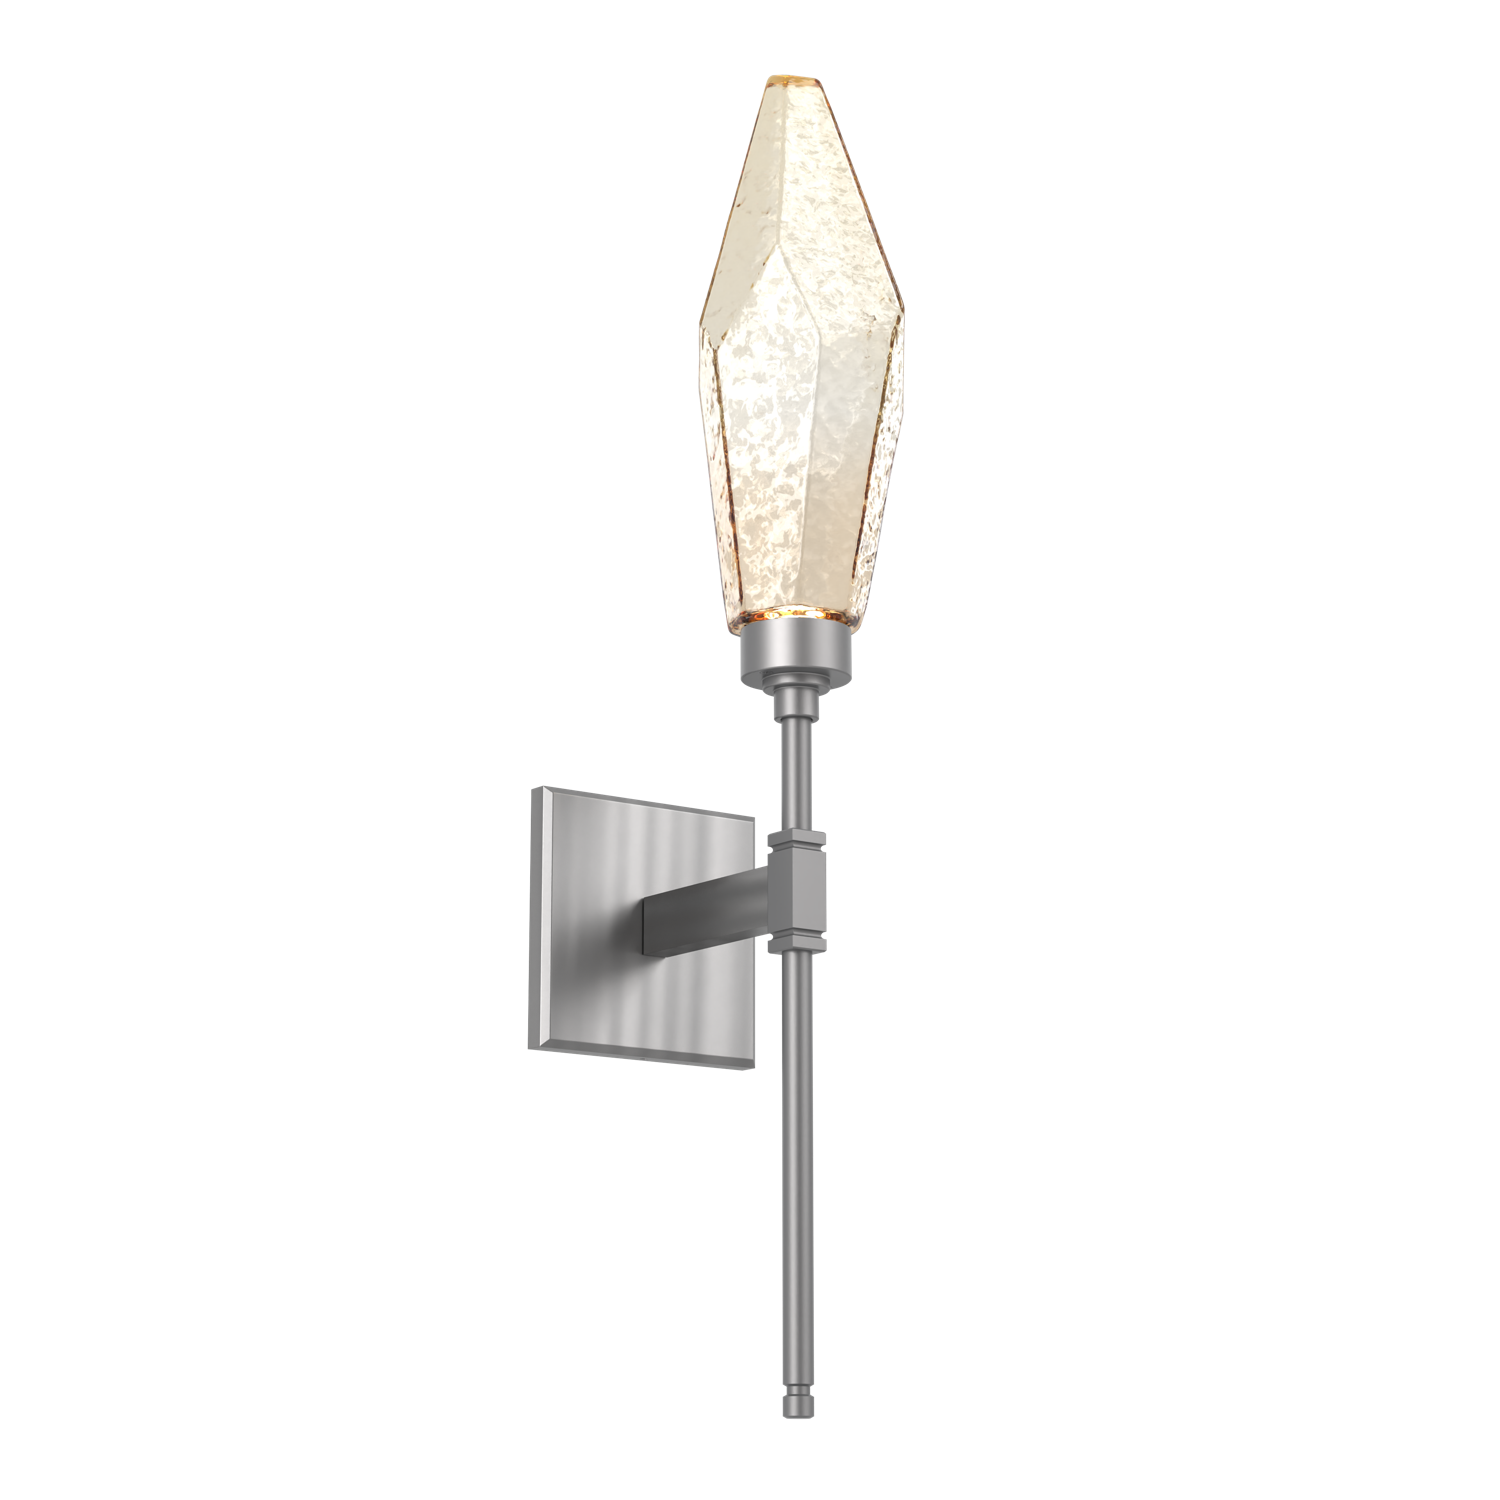 IDB0050-07-SN-CA-Hammerton-Studio-Rock-Crystal-belvedere-wall-sconce-with-satin-nickel-finish-and-chilled-amber-blown-glass-shades-and-LED-lamping